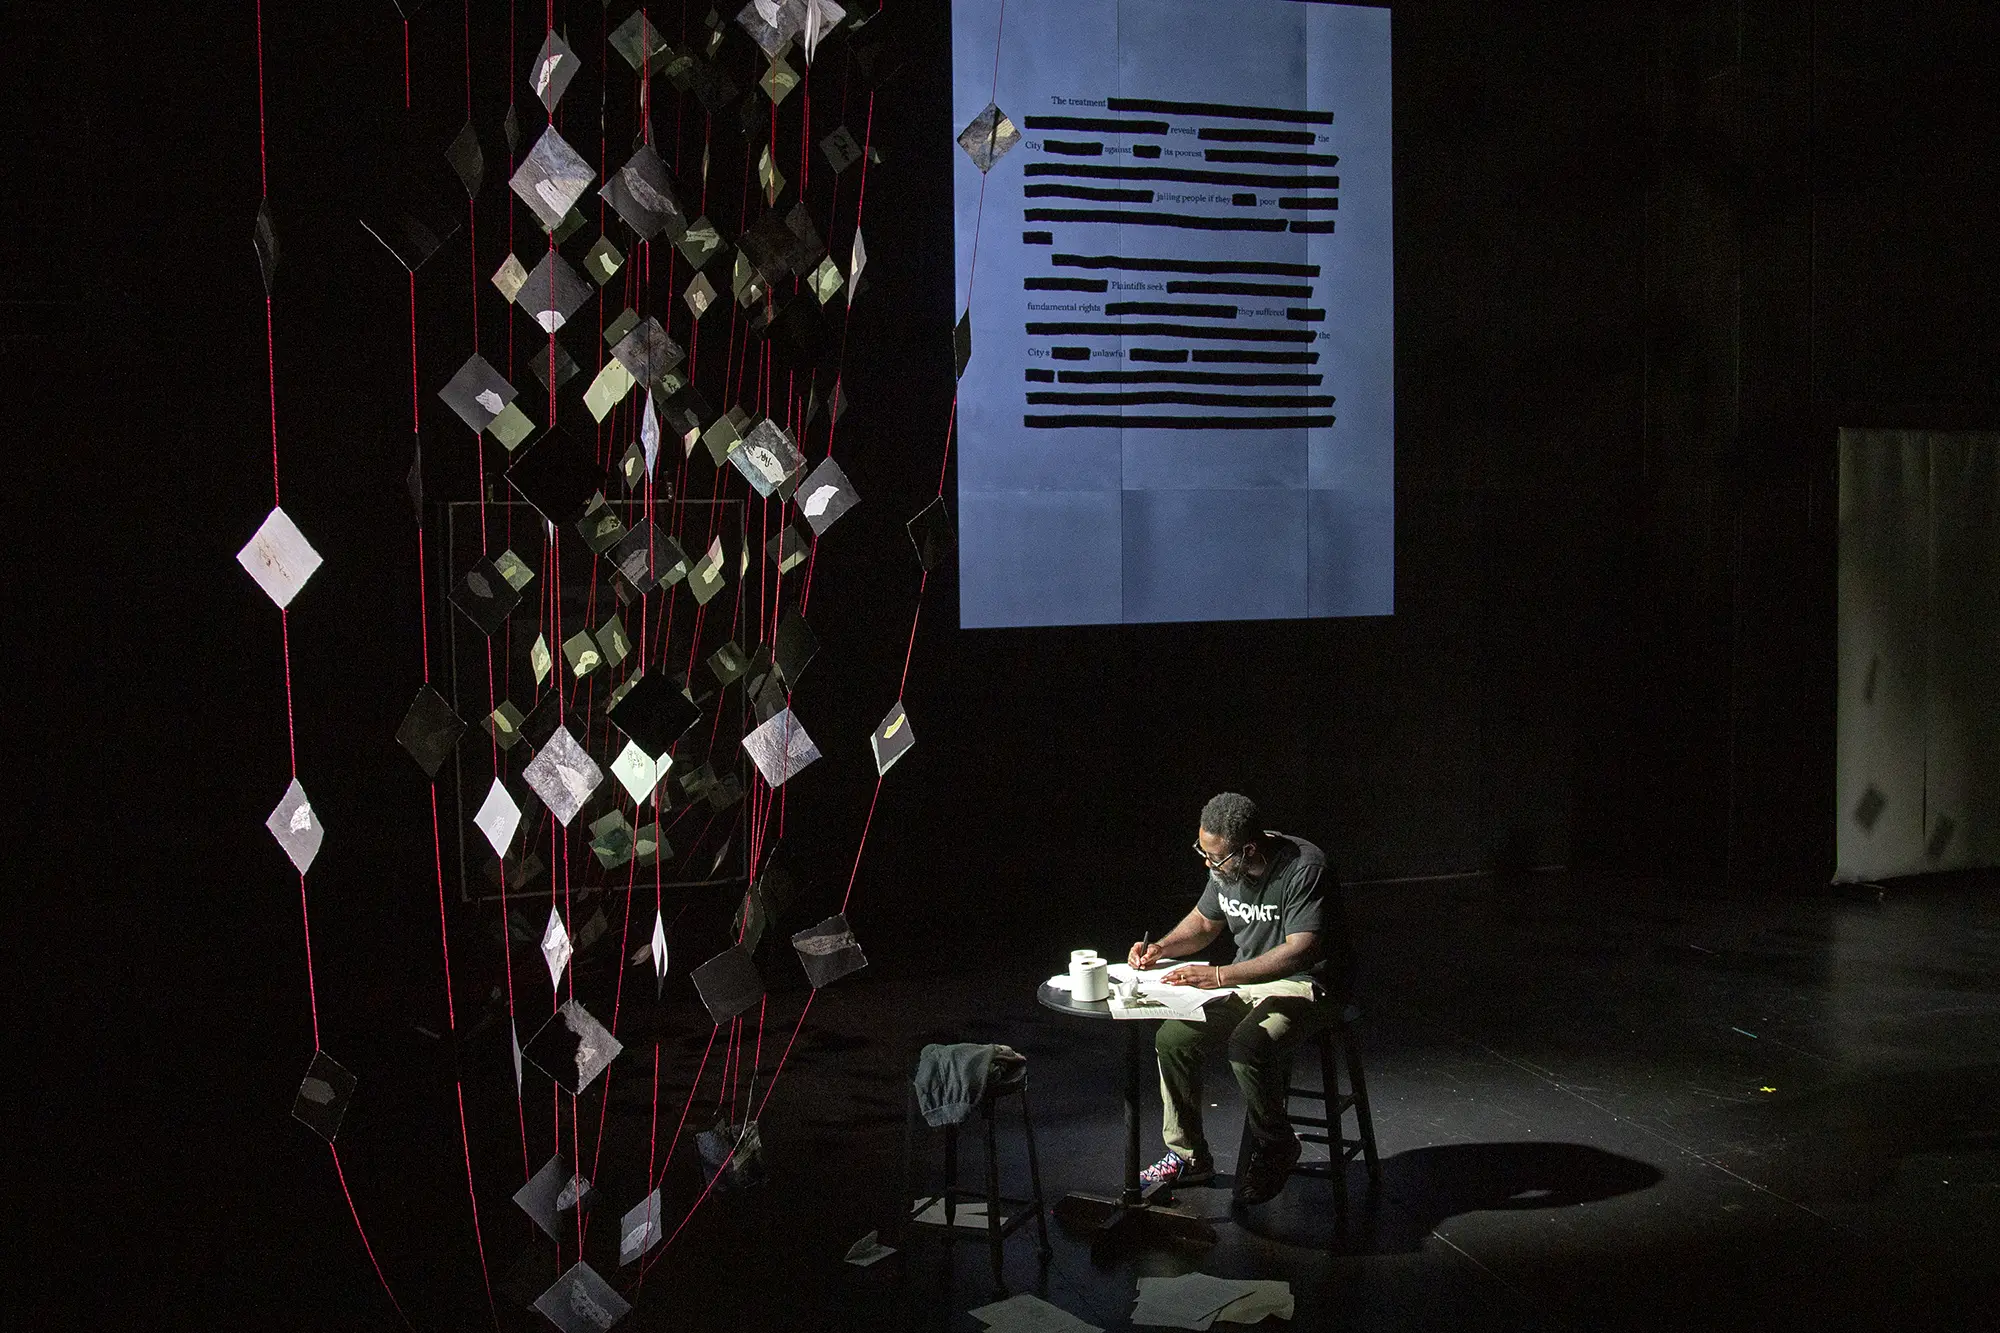 Reginald Dwayne Betts performs, spotlit sitting at a table within an dark installation of visual projection and “kites”, letters and materials made of Japanese washi 